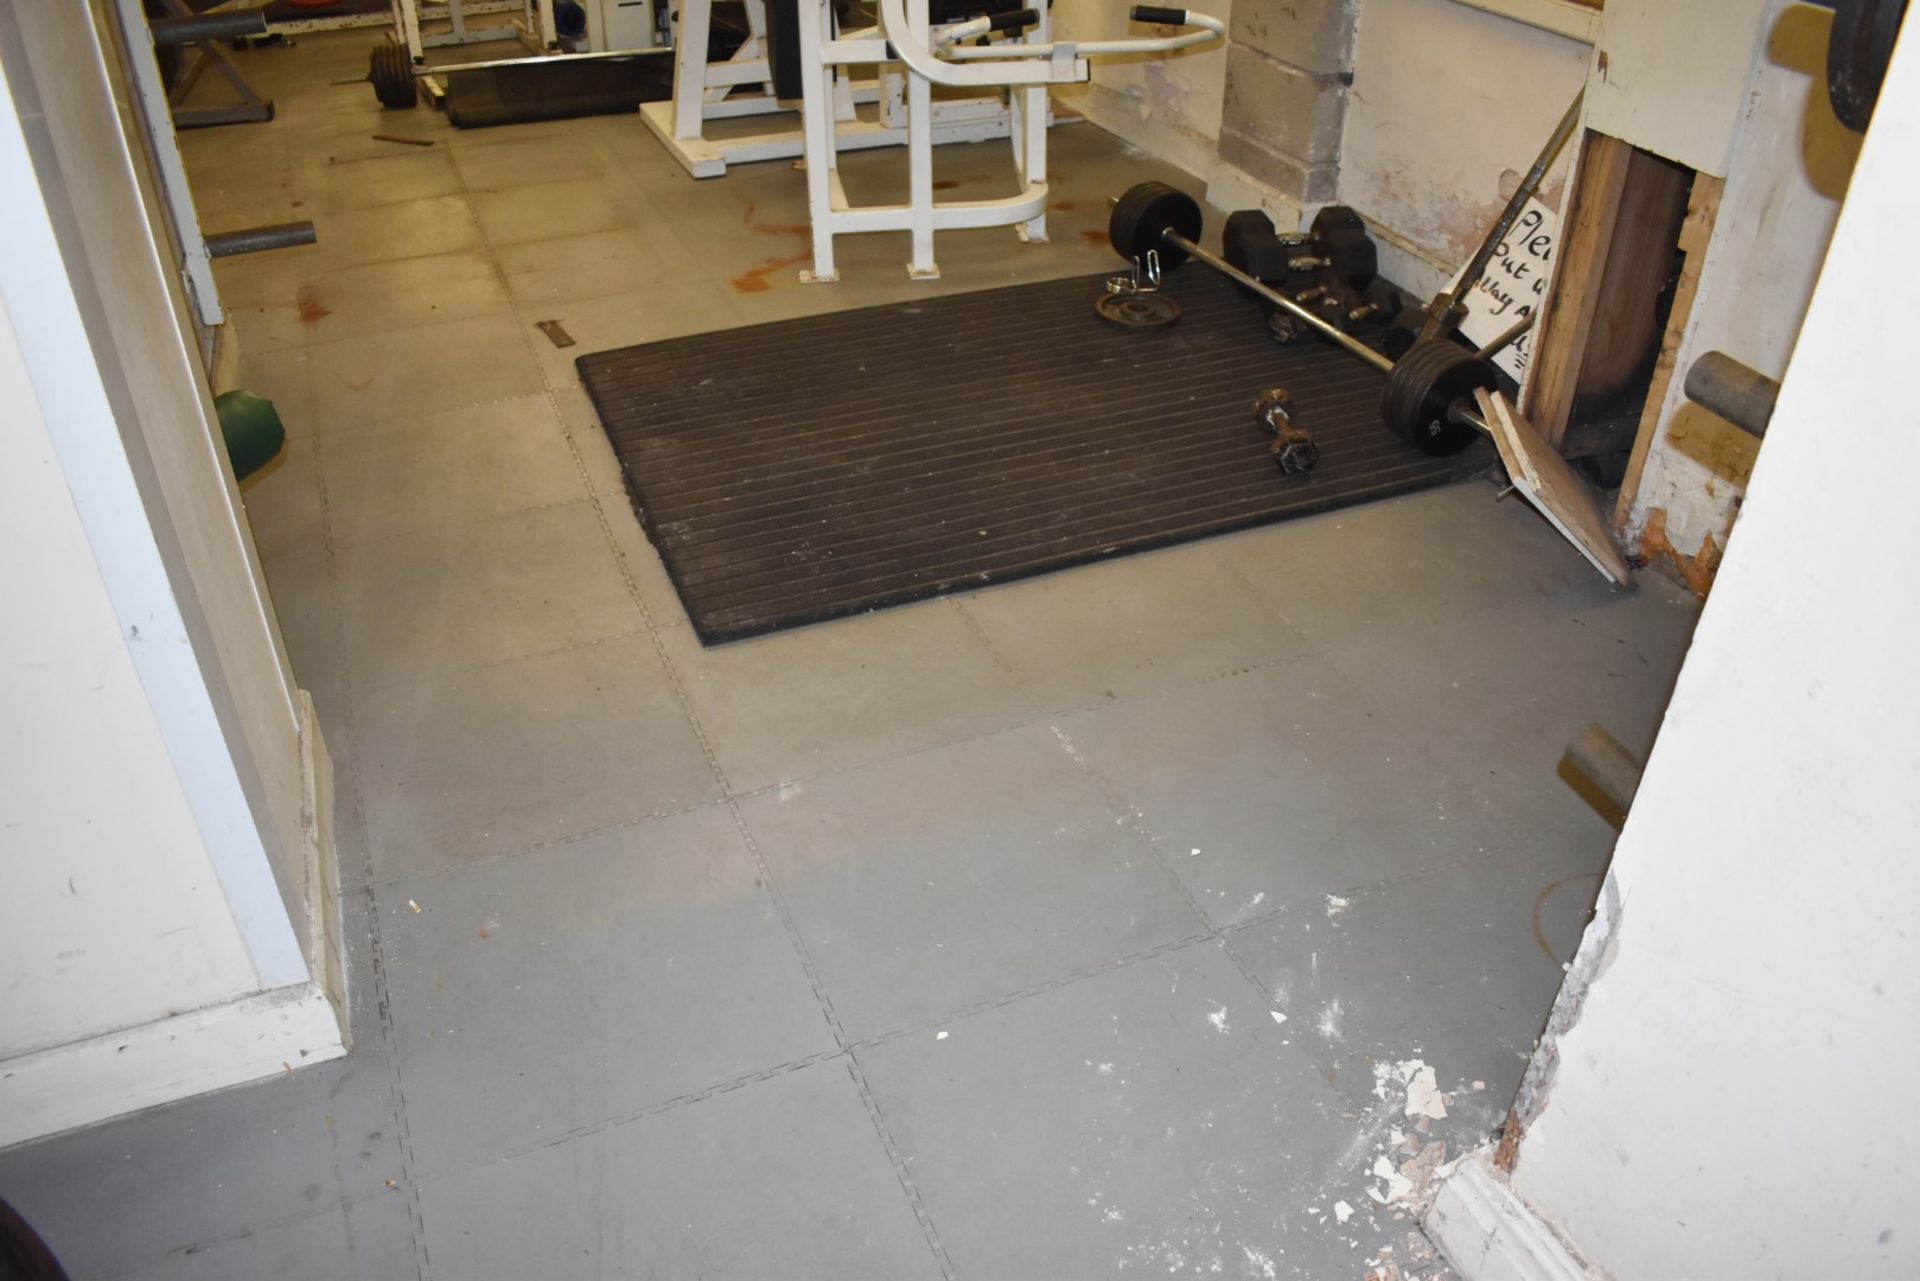 Contents of Bodybuilding and Strongman Gym - Includes Approx 30 Pieces of Gym Equipment, Floor Mats, - Image 14 of 31